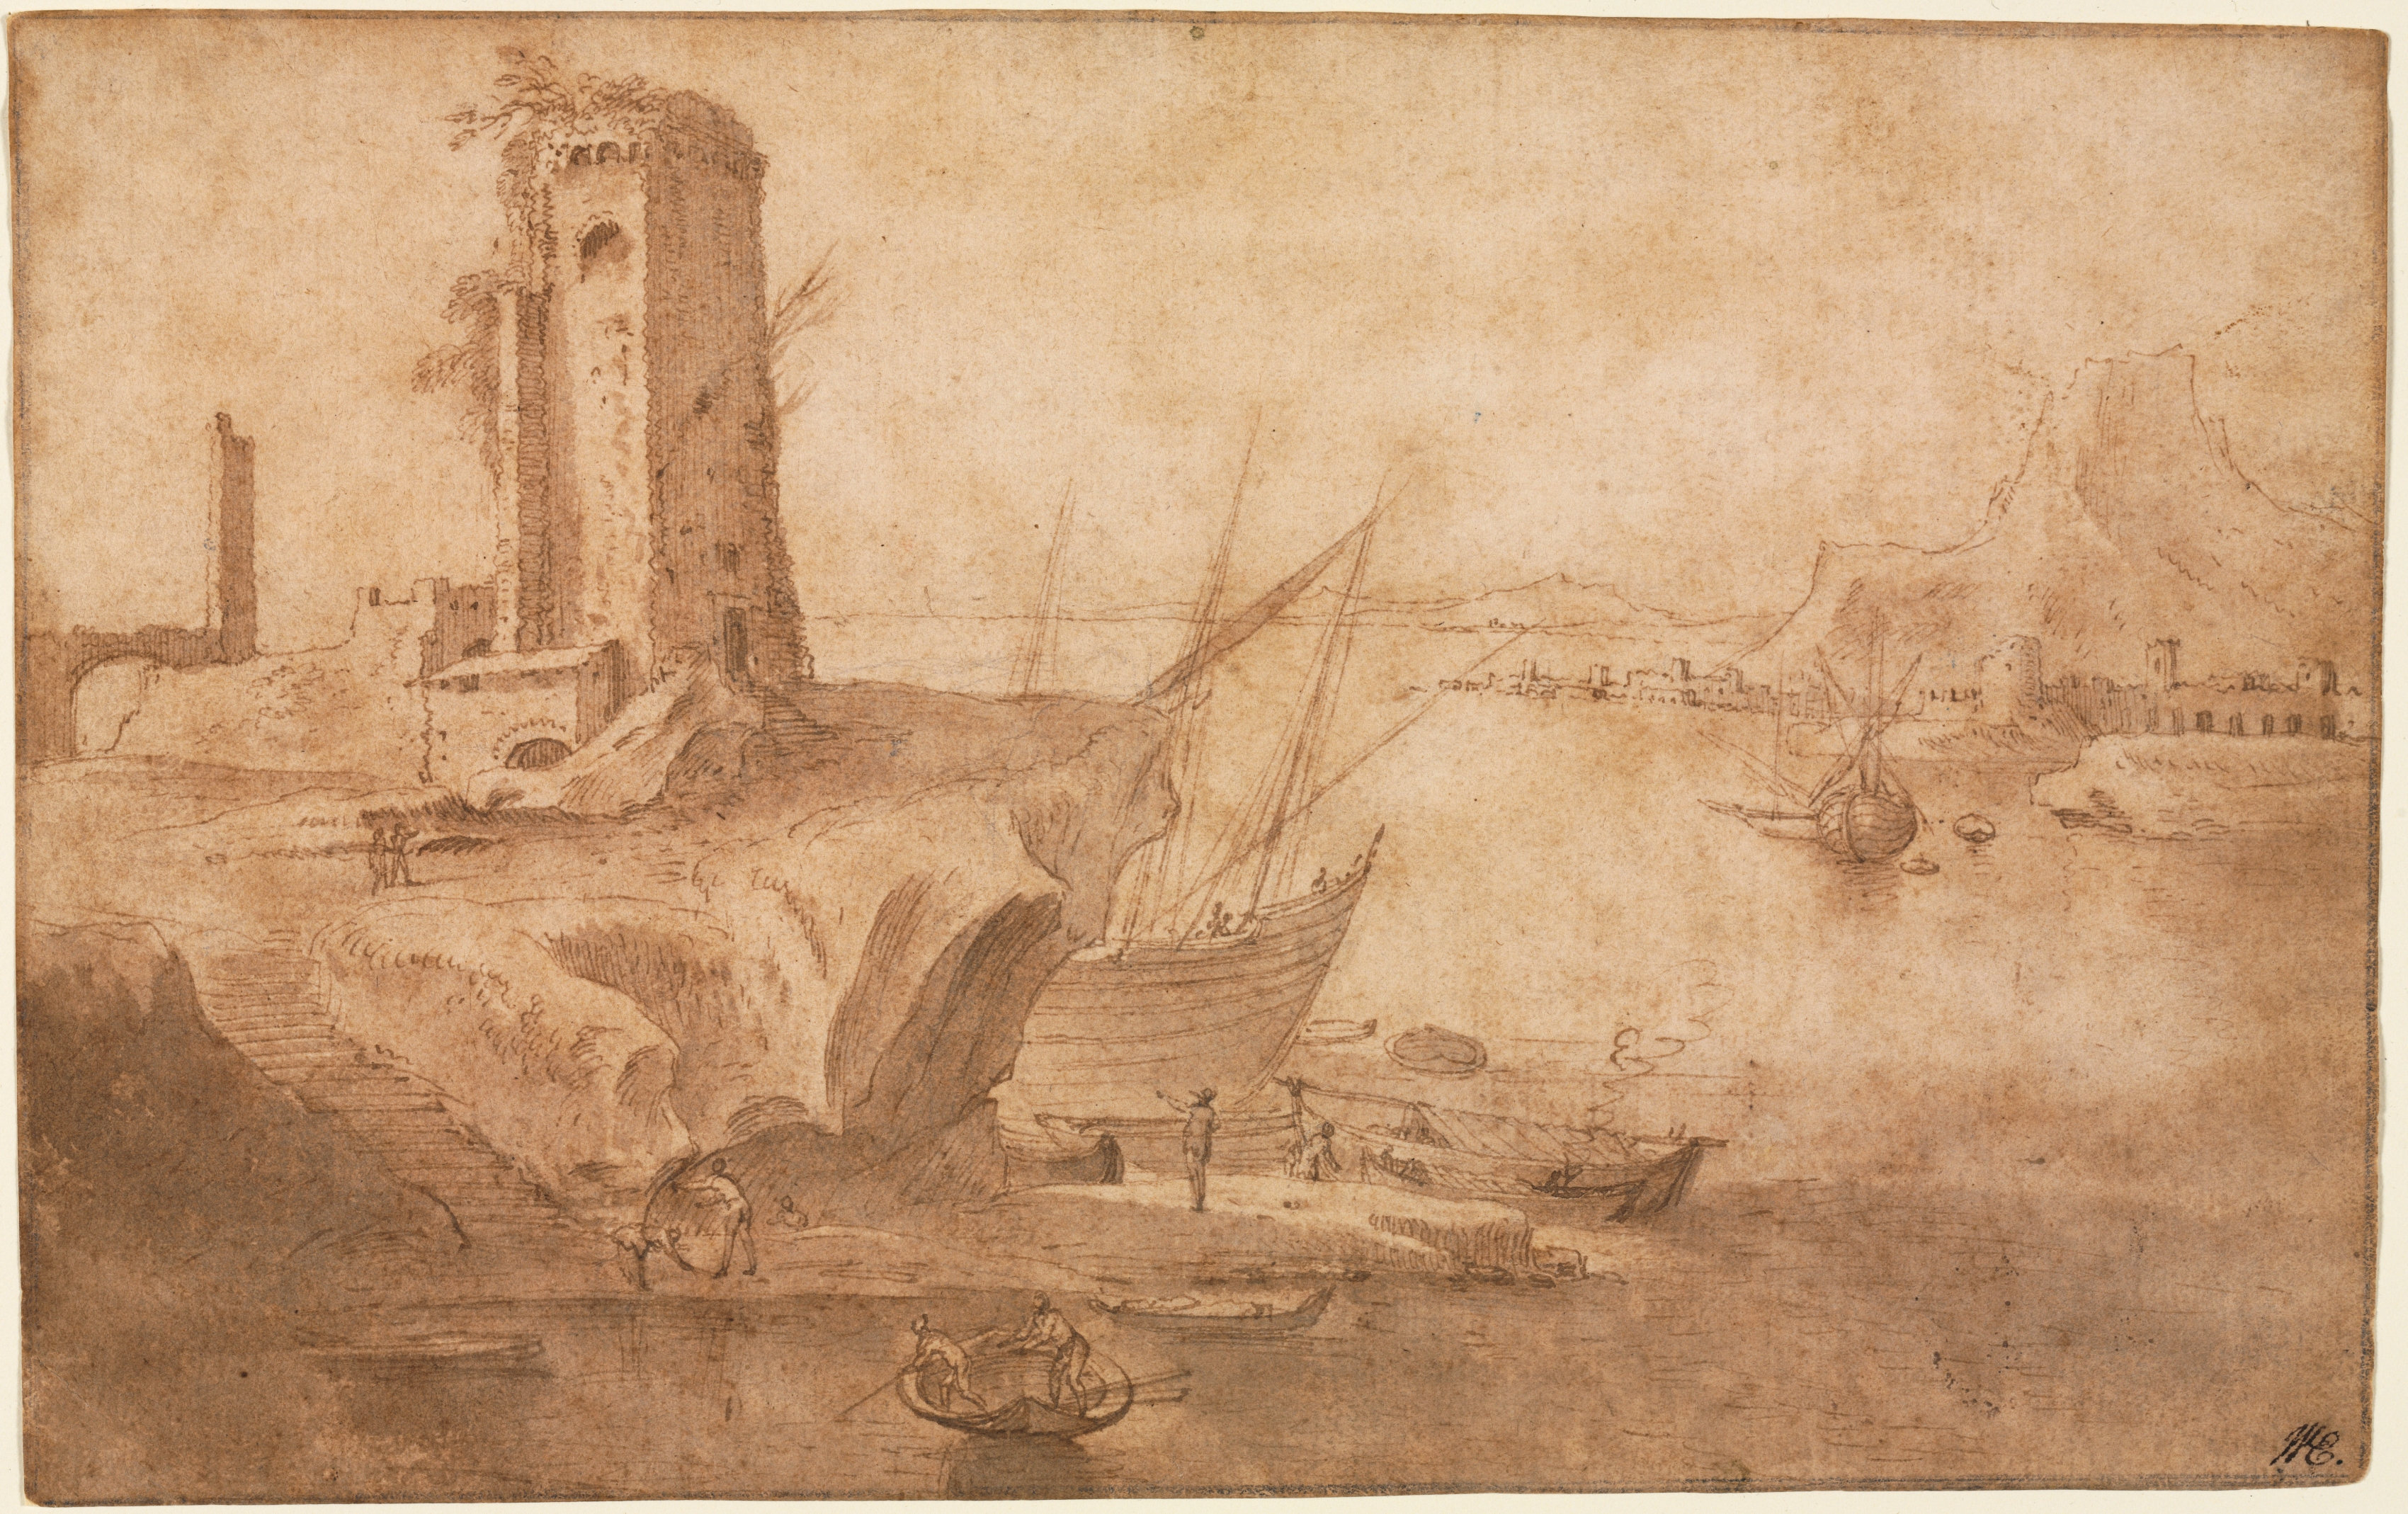 Landscape with Tower at Seashore